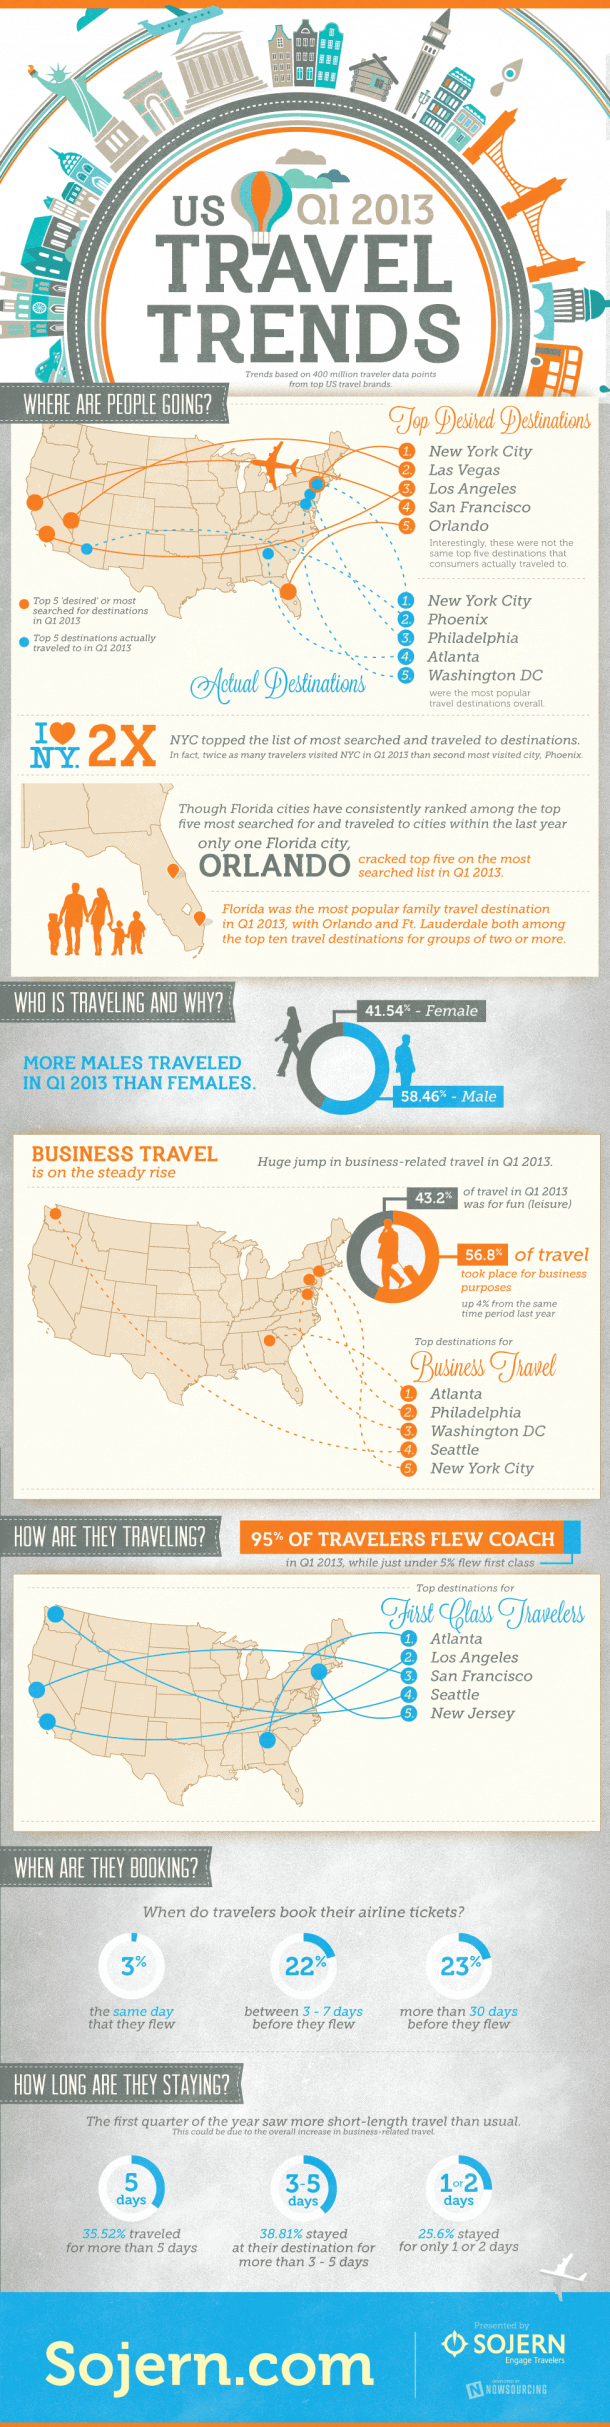 Travel Trends Infographic - Q1 2013